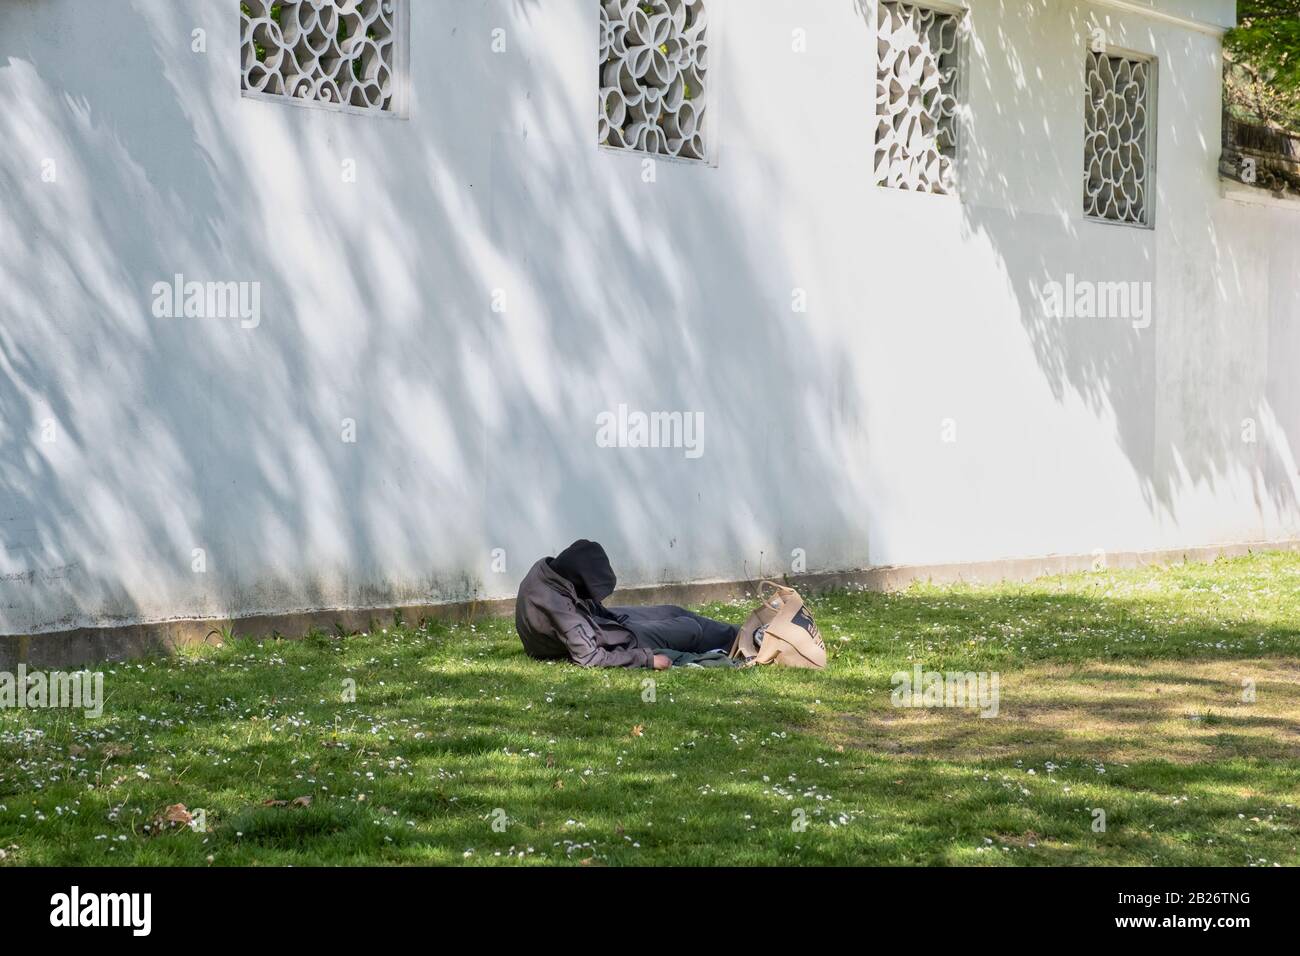 VANCOUVER - MAY 05 2019: Chinatown, Vancouver Canada. Homeless people sleeping on grass. Stock Photo